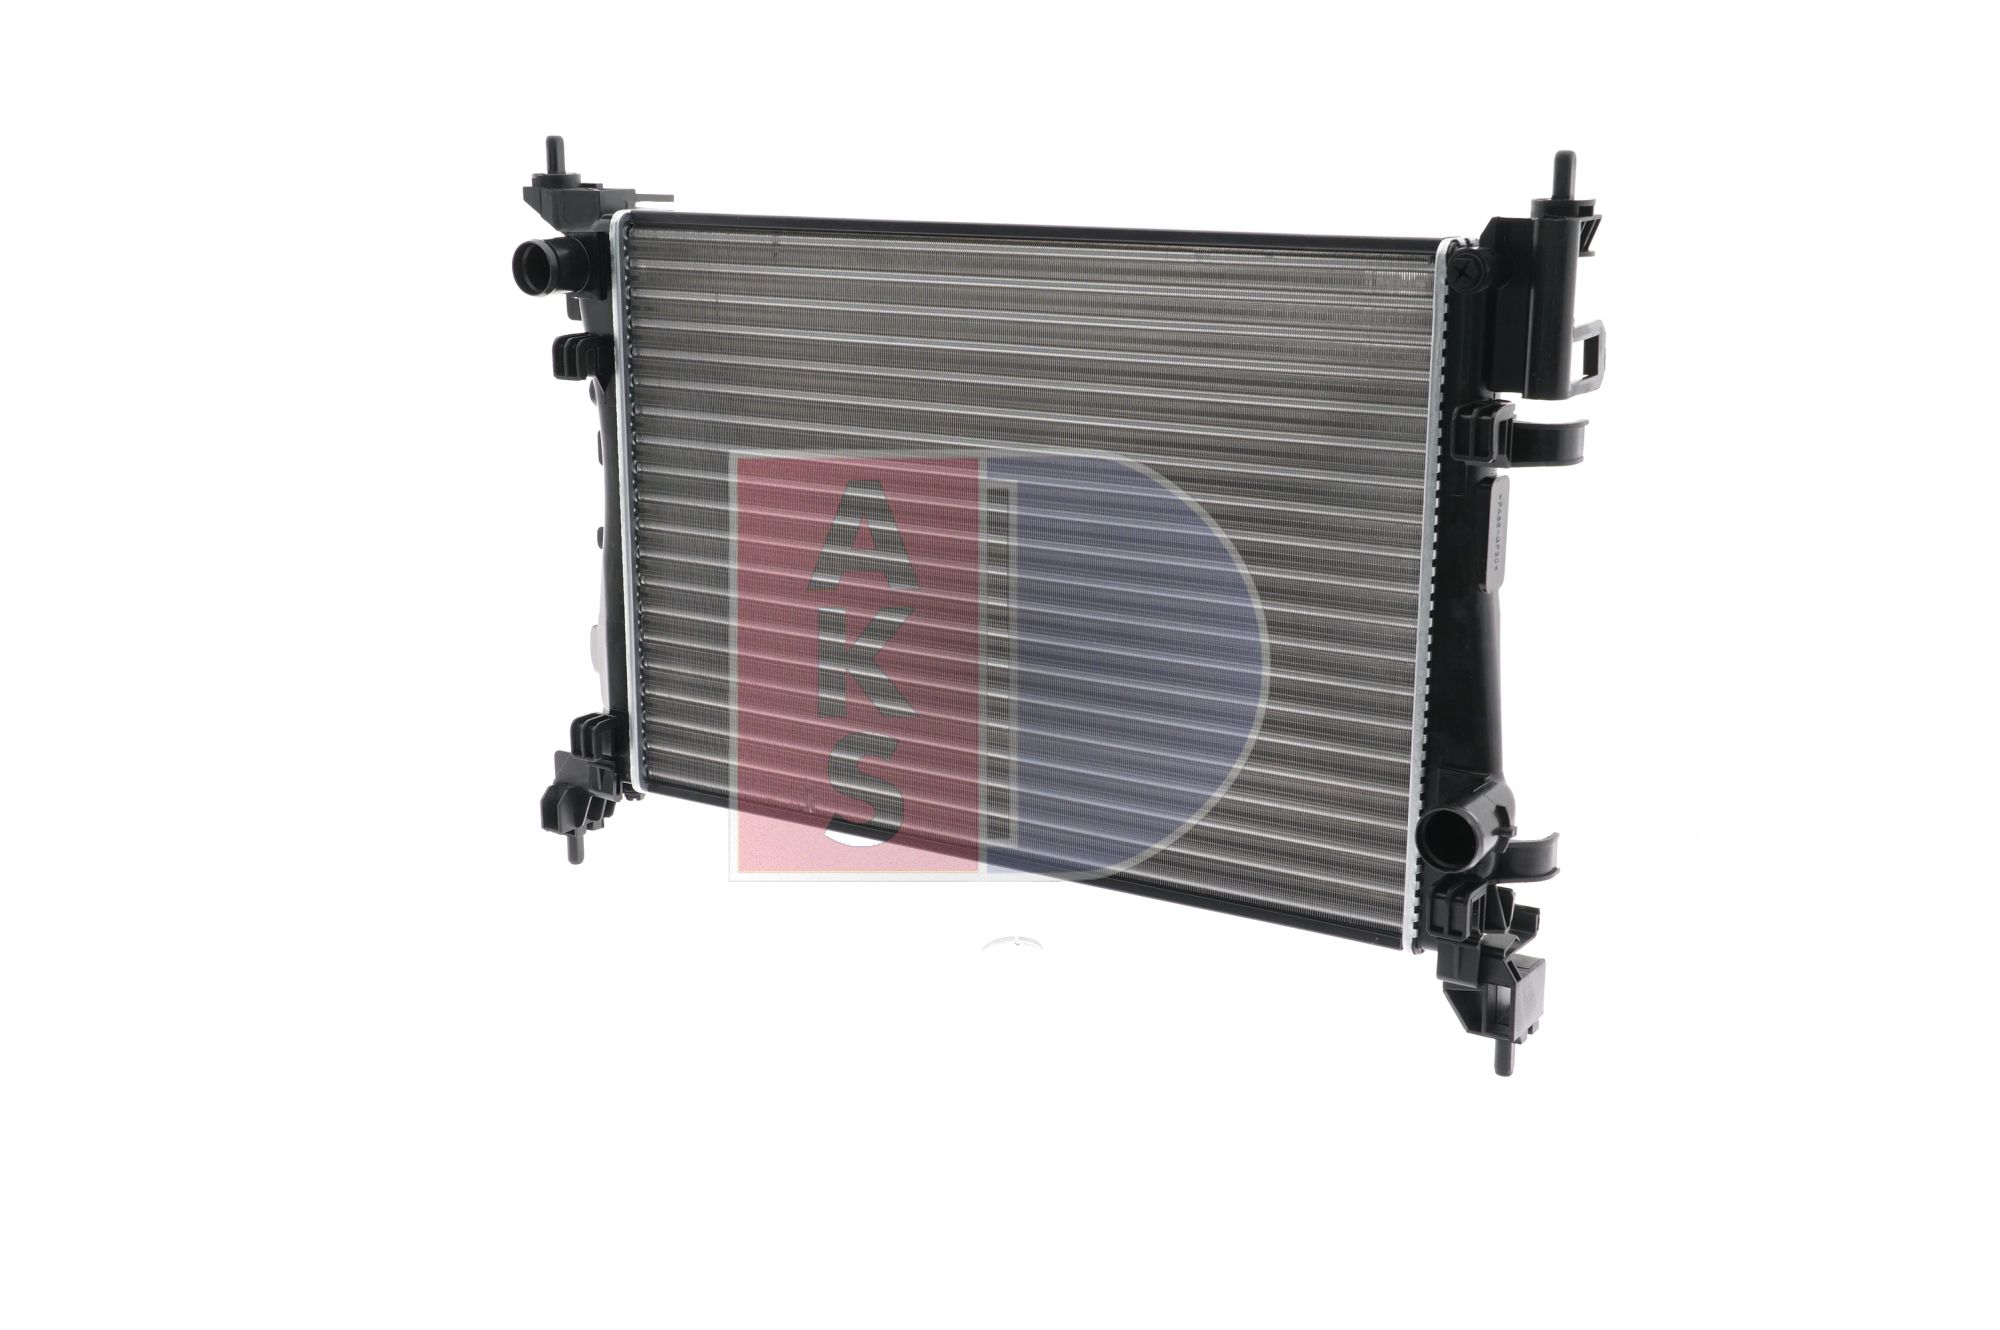 AKS DASIS 080087N Engine radiator 540 x 375 x 26 mm, Mechanically jointed cooling fins